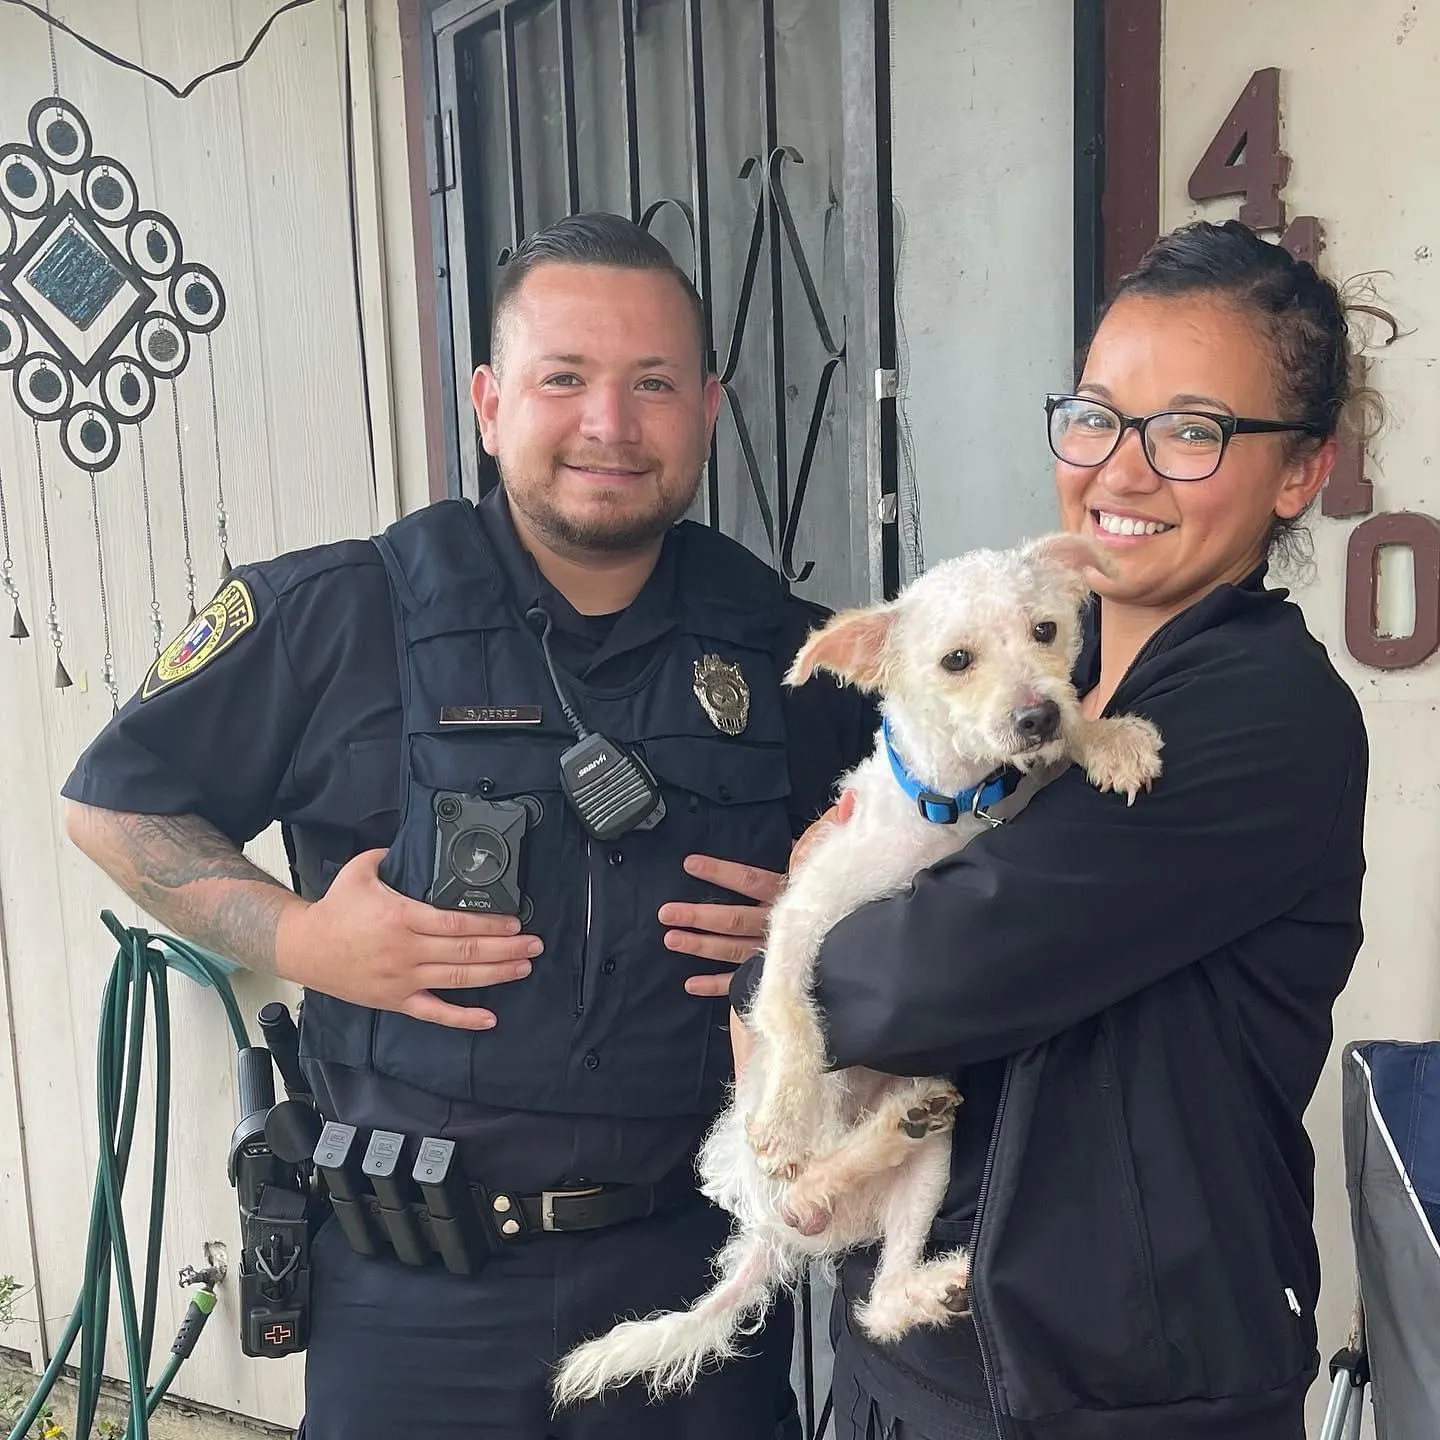 police officer standing next to a girl holding the missing dog